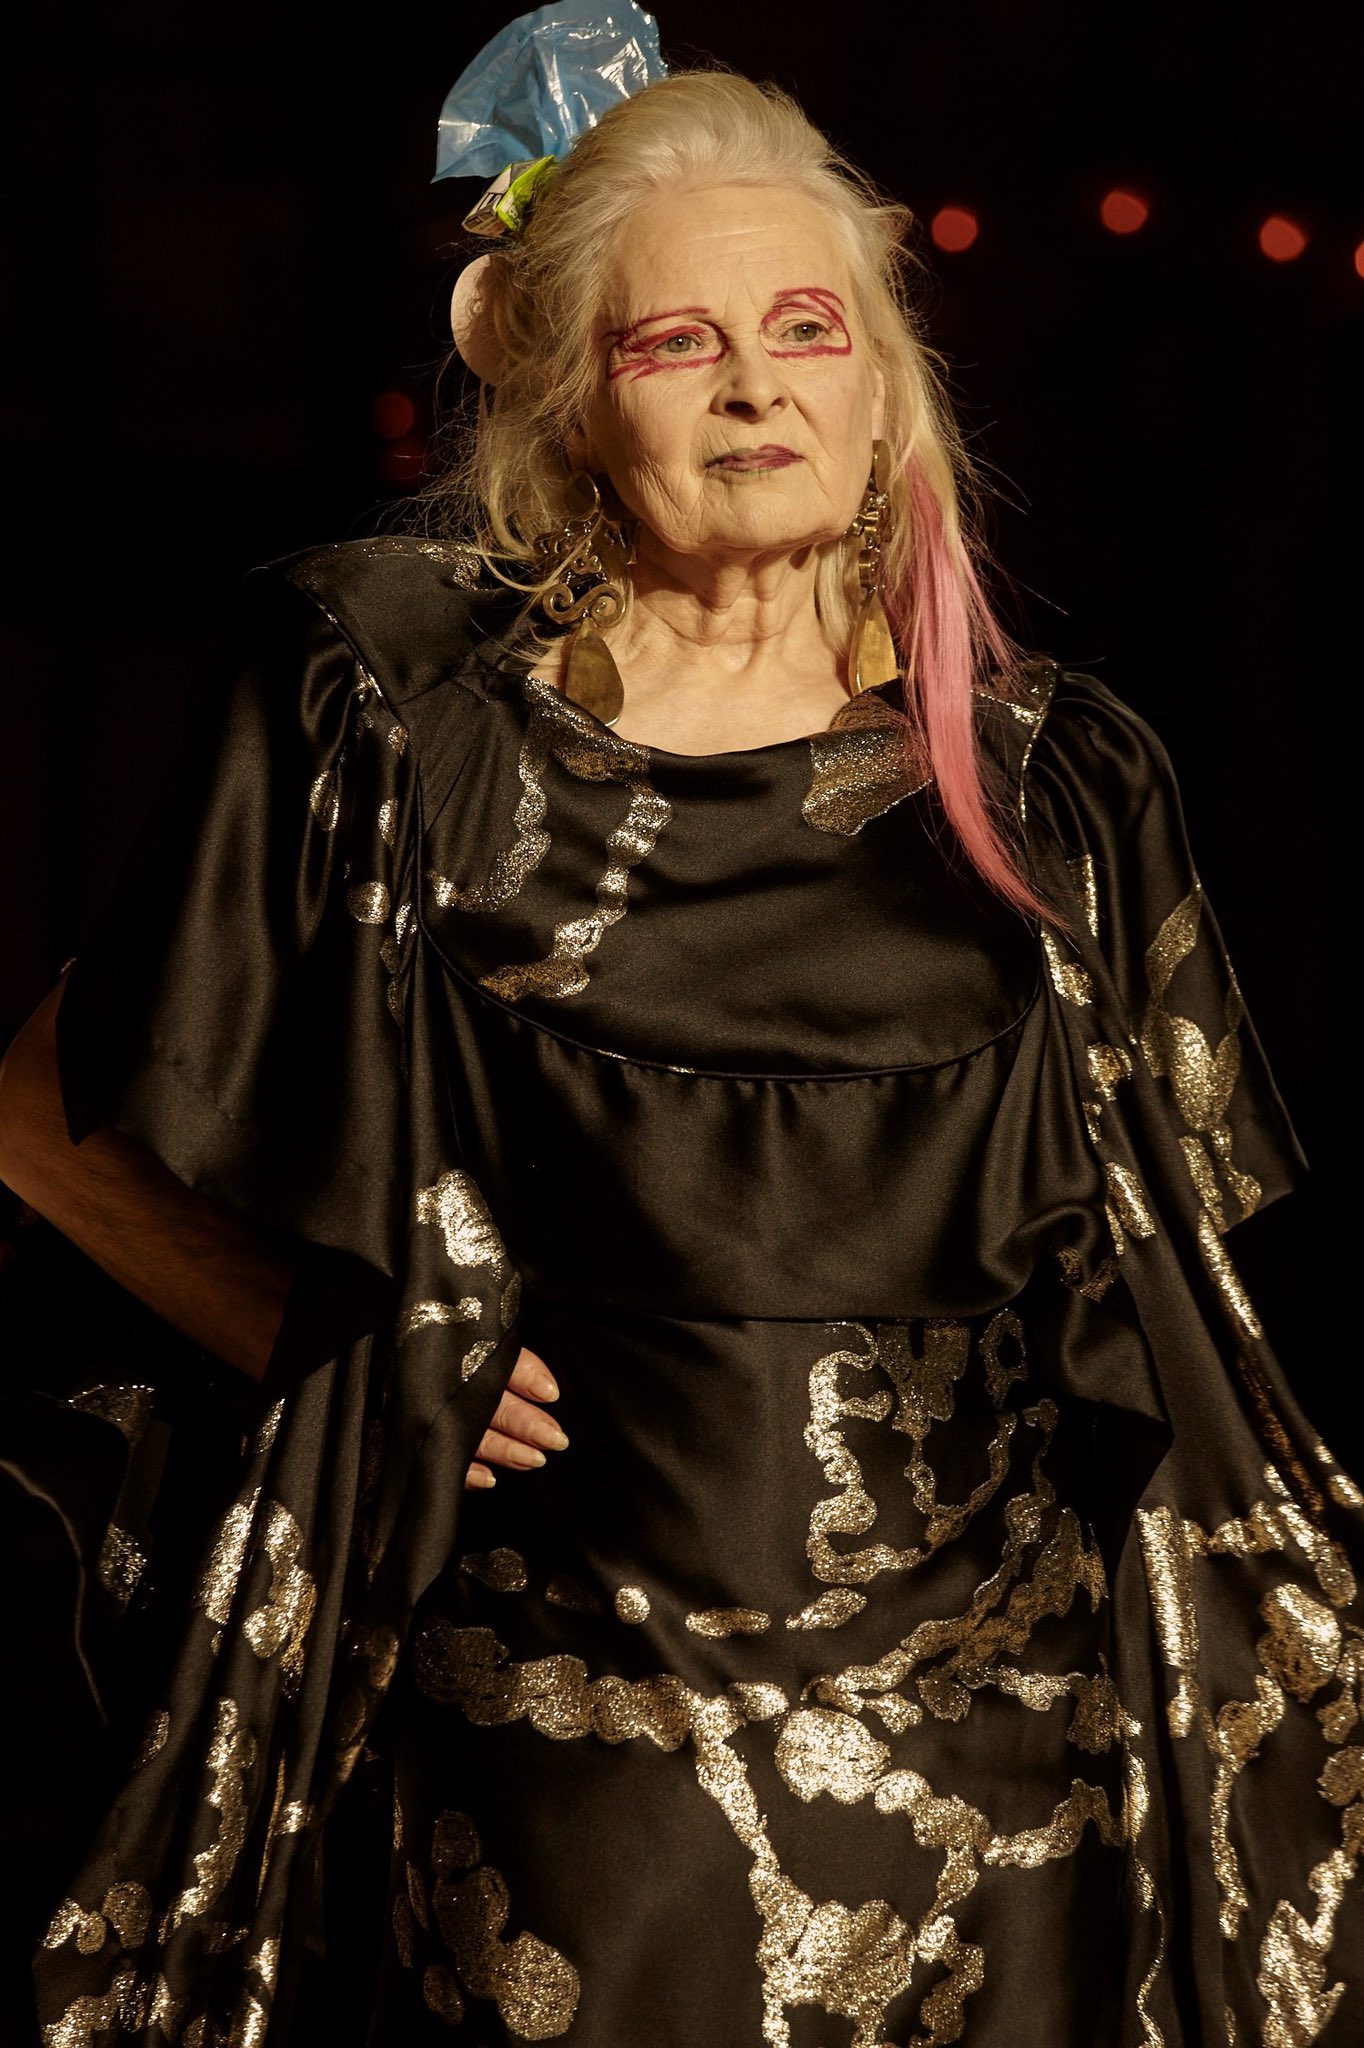 Vivienne westwood walking in her own shows, happy birthday to this icon 